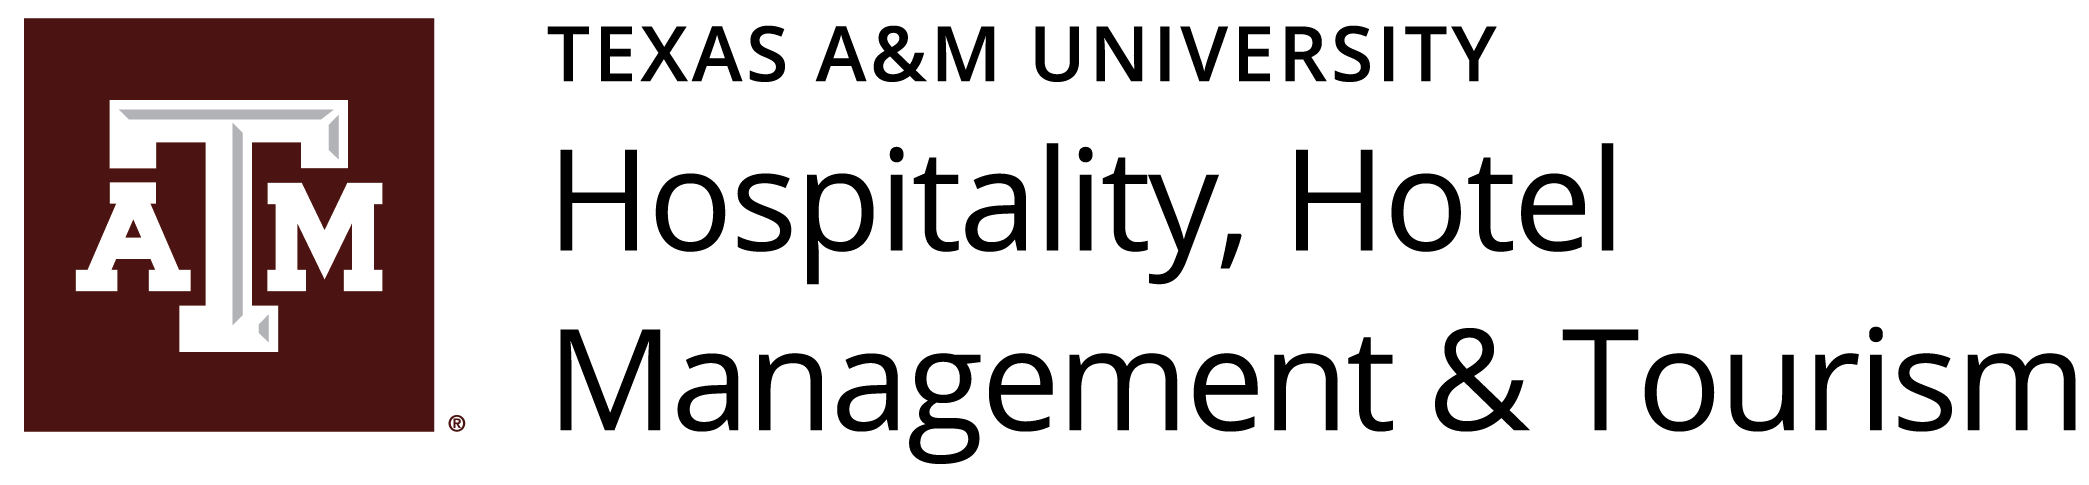 thesis topics for hotel and restaurant management students